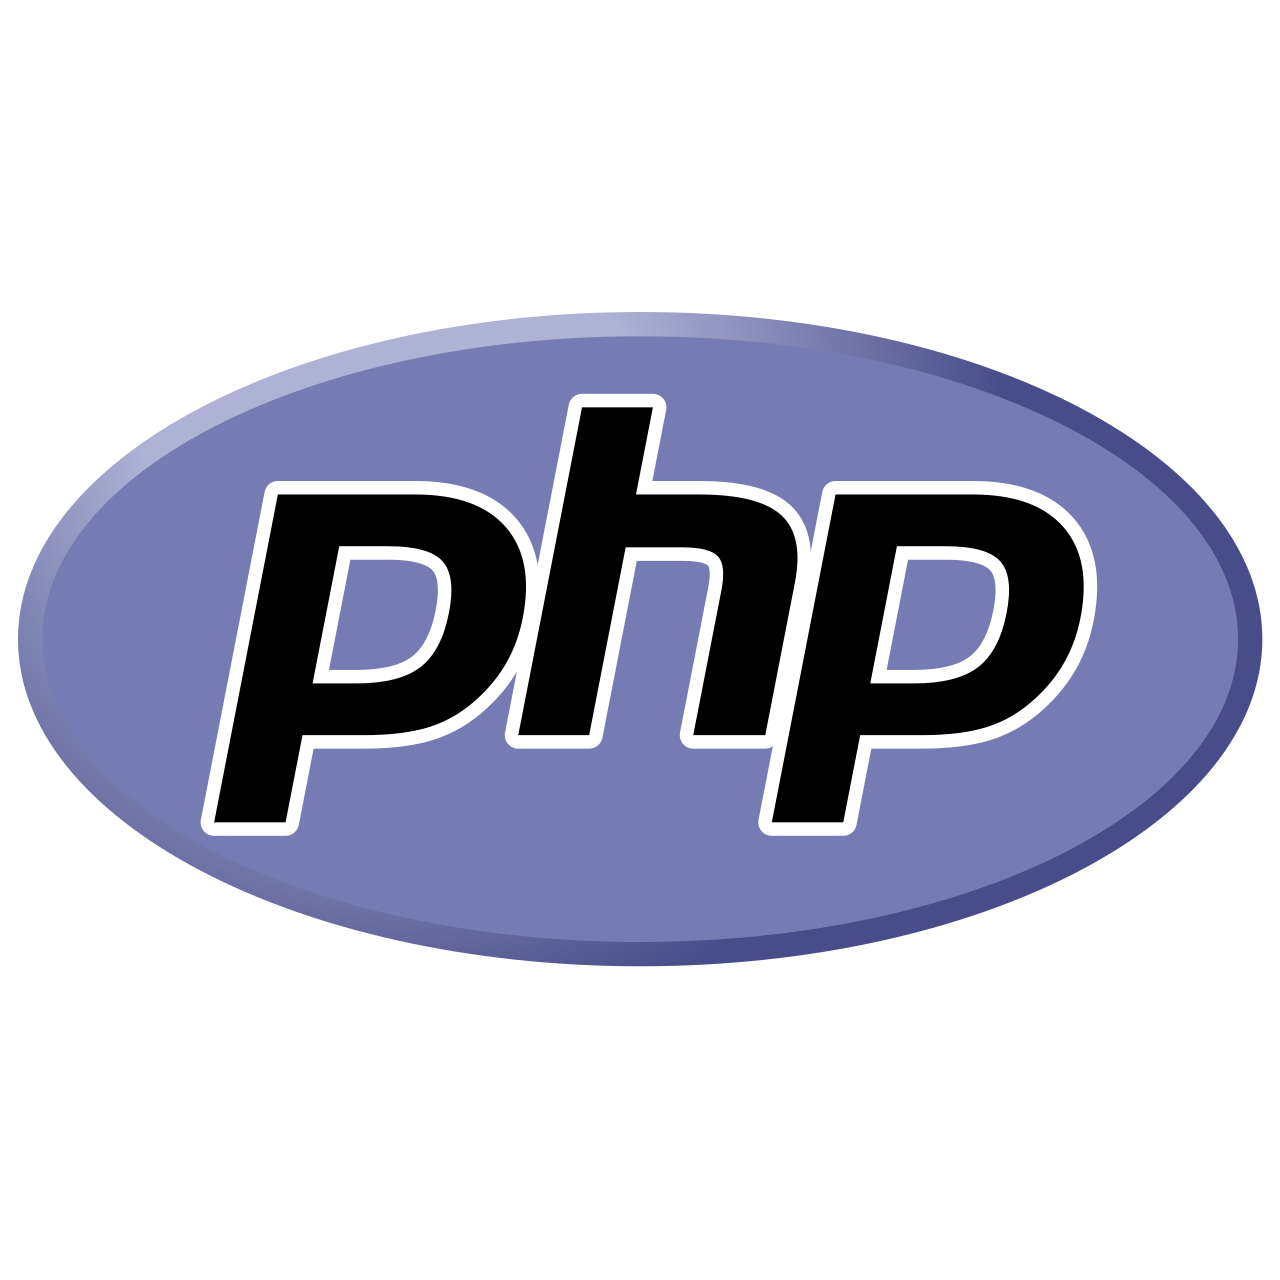 phpのロゴ